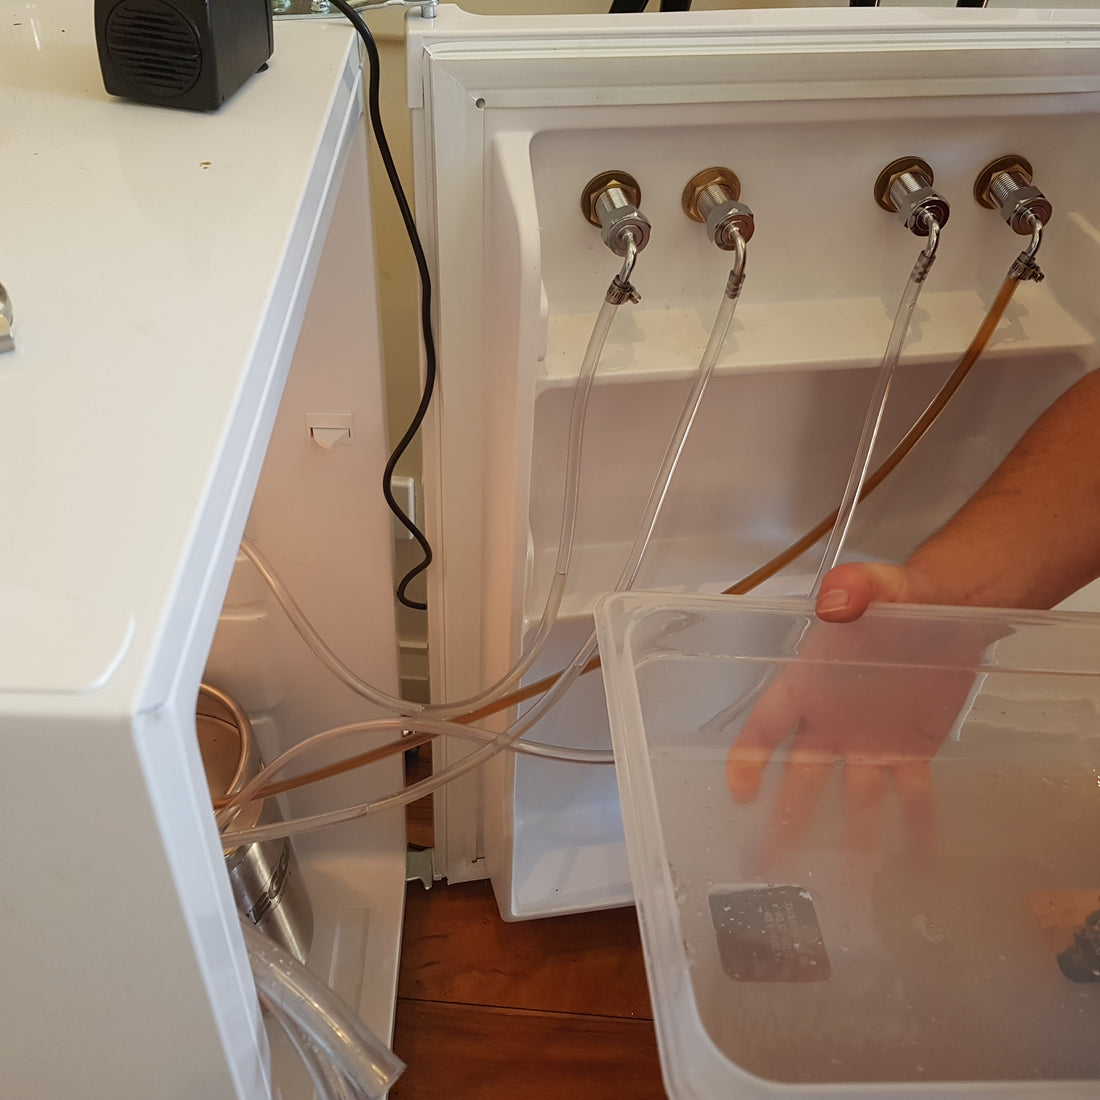 How To Temperature Control Your Fermenter For Under $100